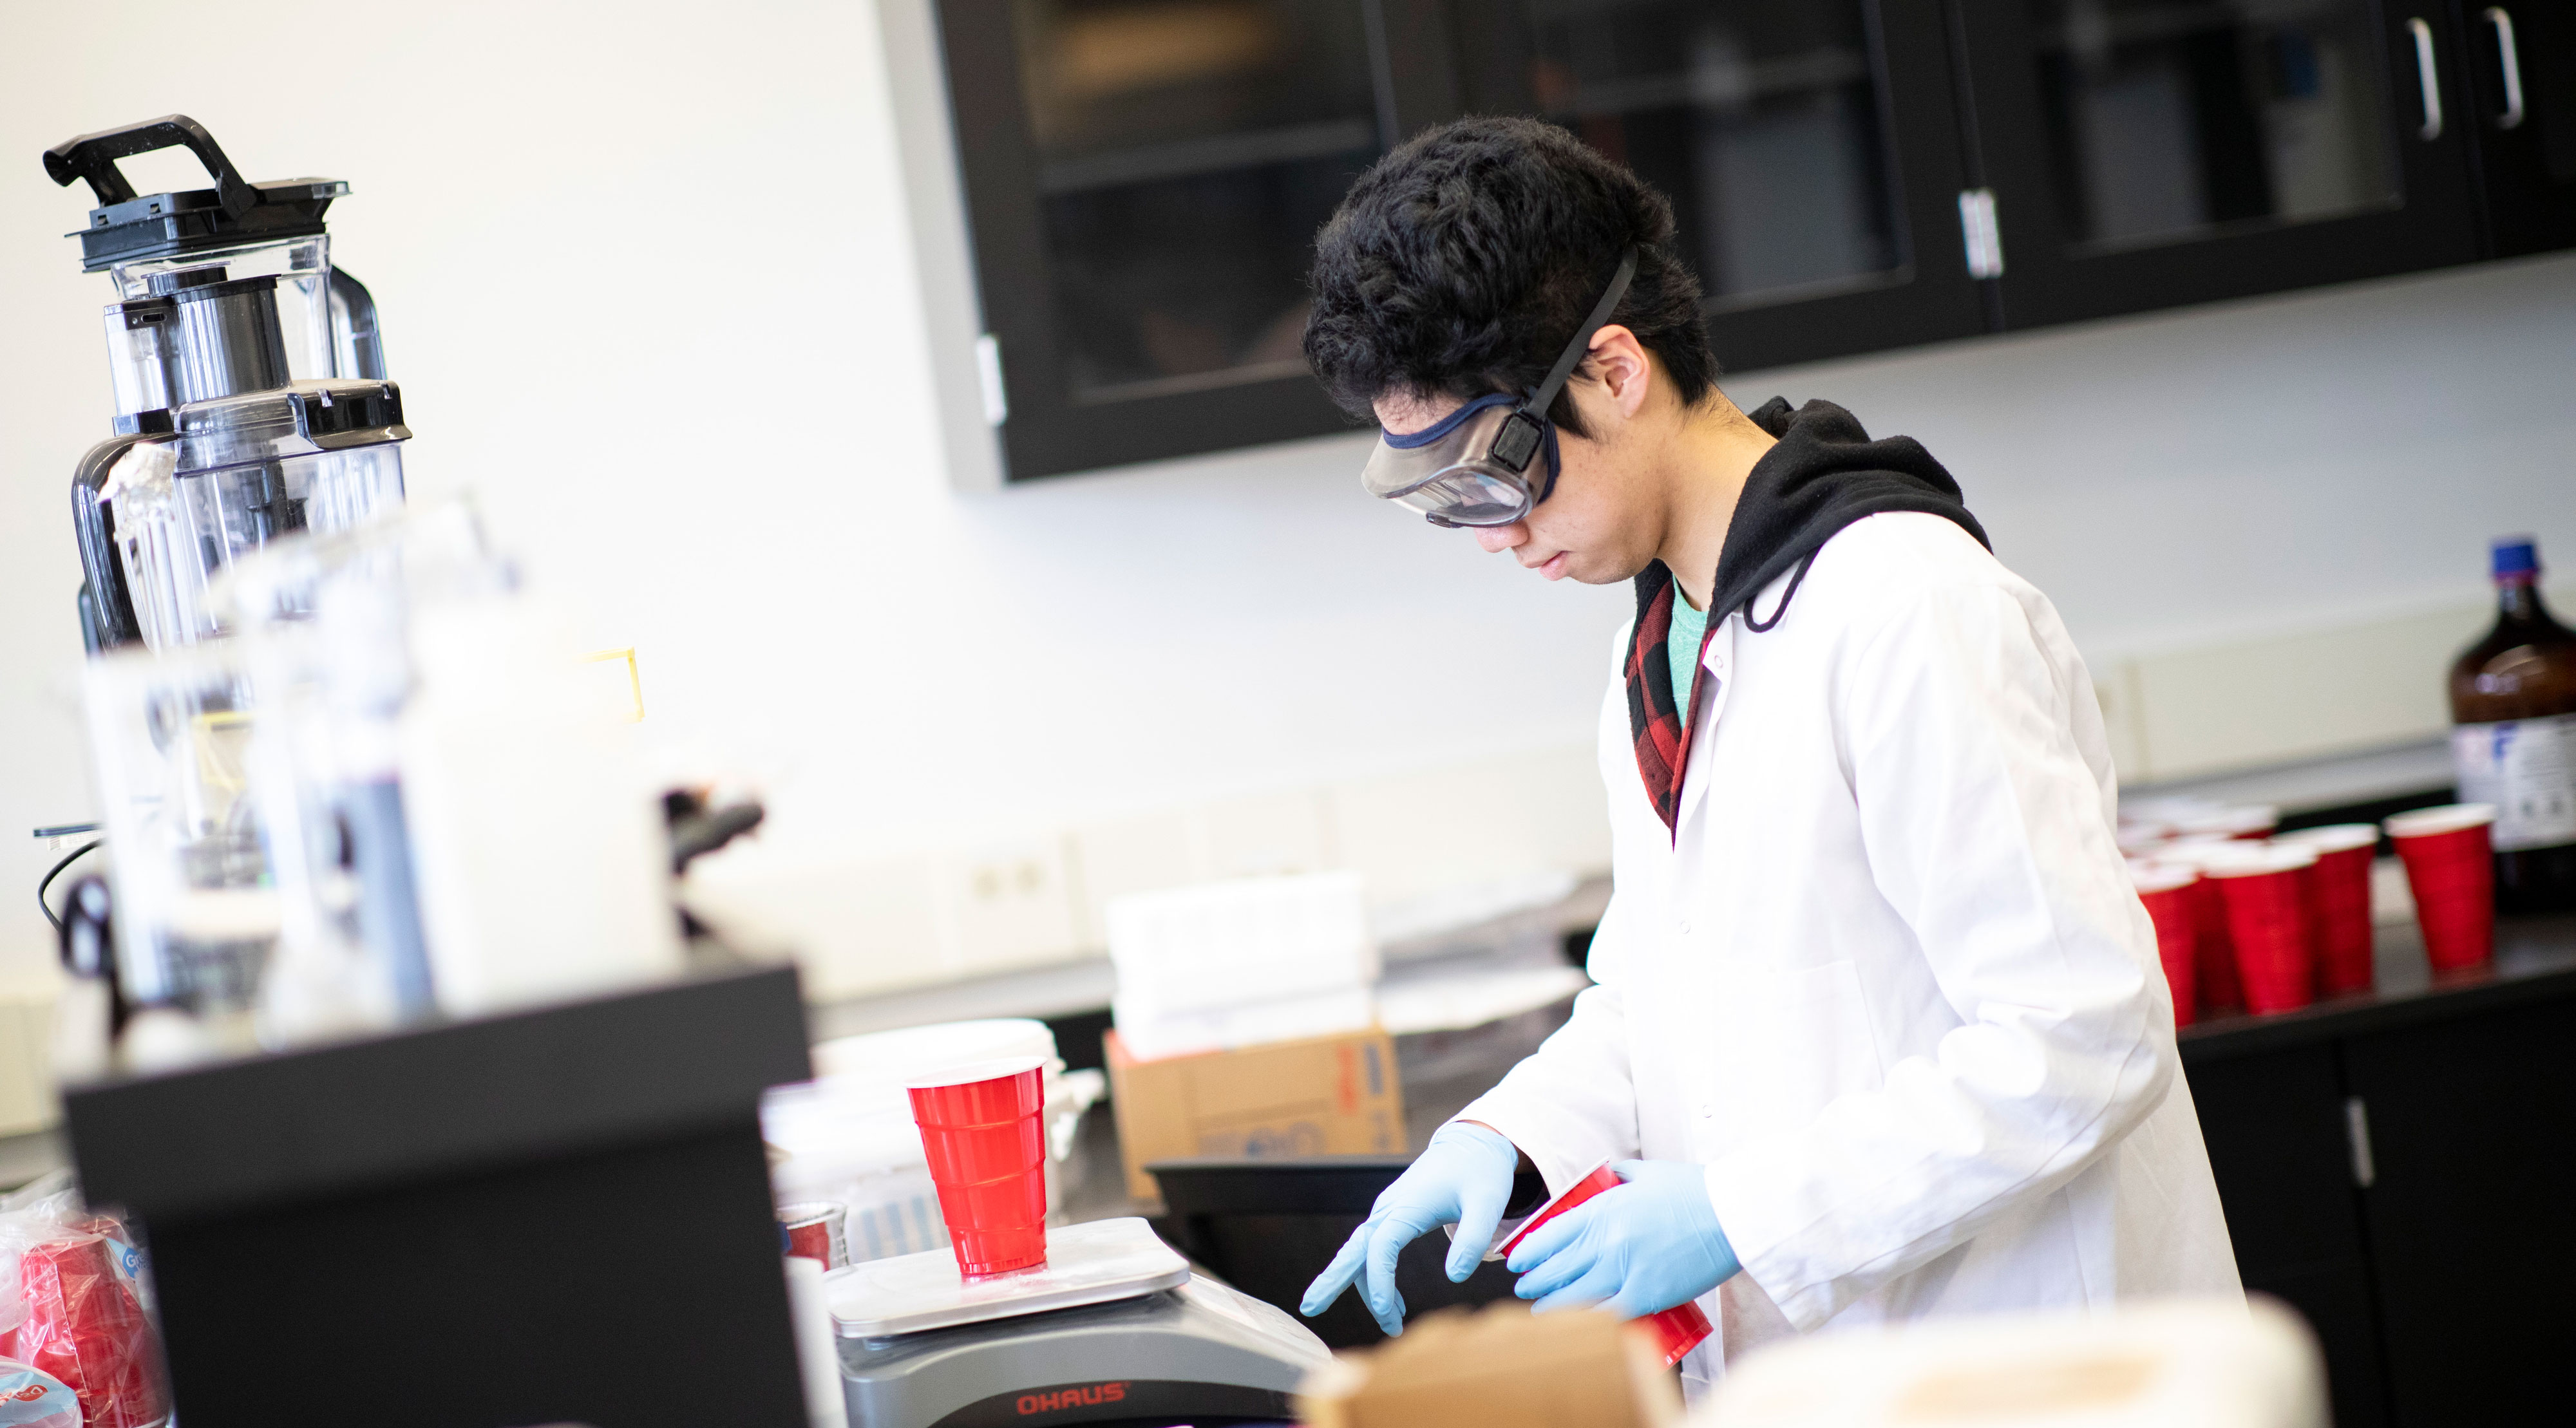 A student wearing safety googles, blue gloves and a white lab coat weighs the contents of a red cup inside a lab.